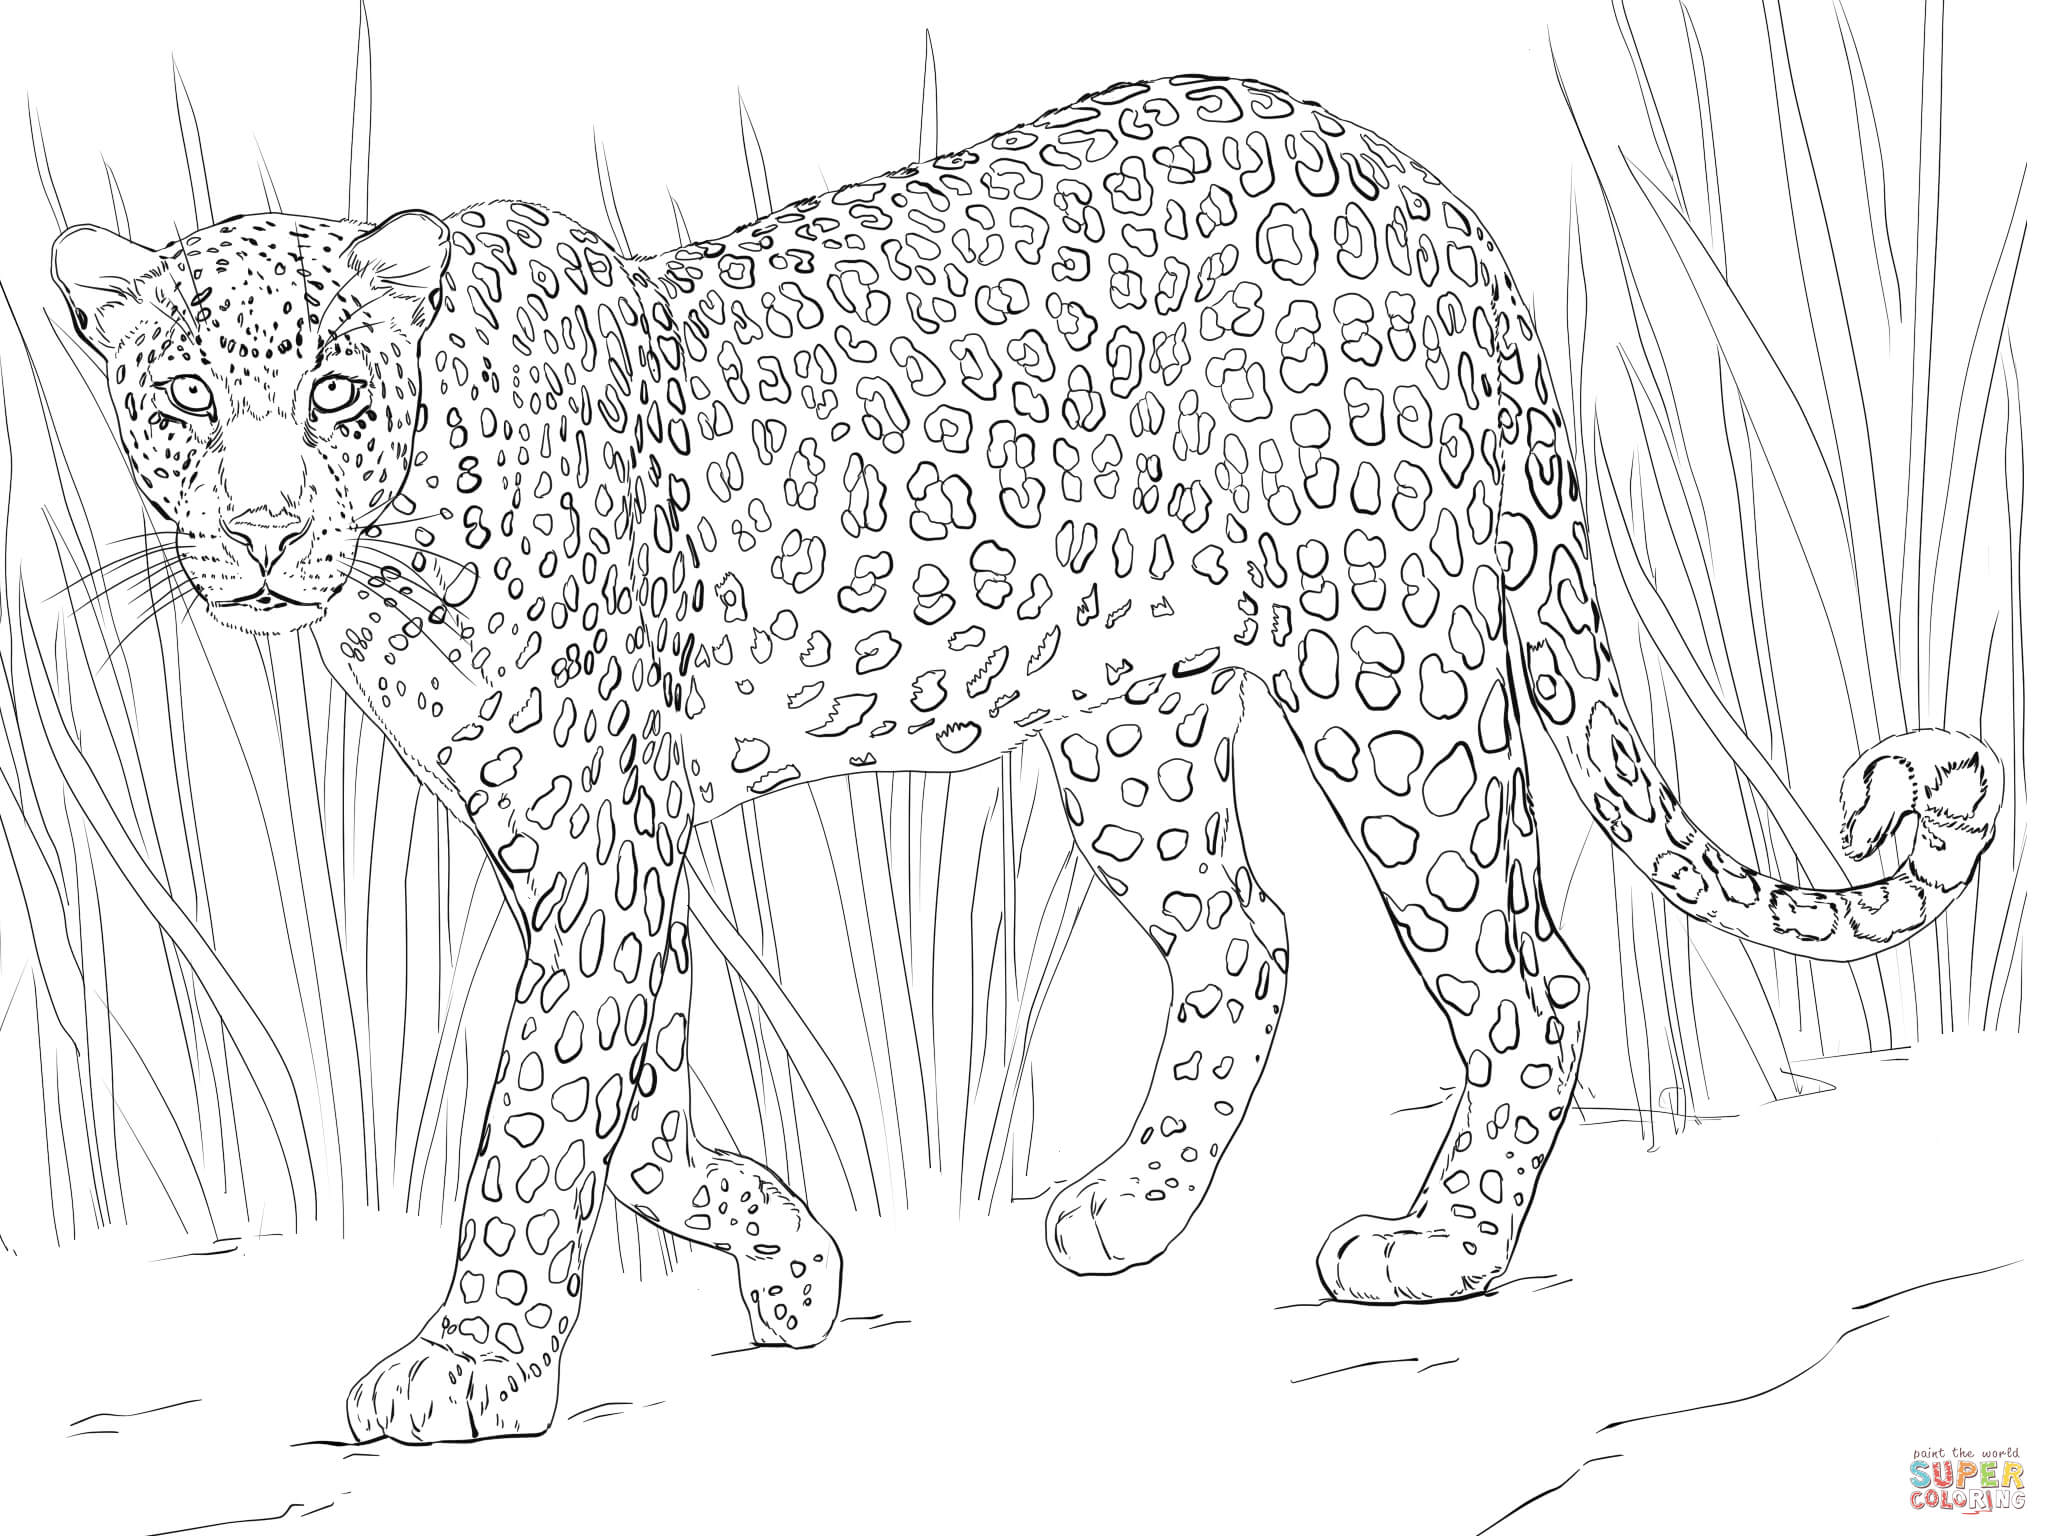 African Leopard coloring page | Free Printable Coloring Pages